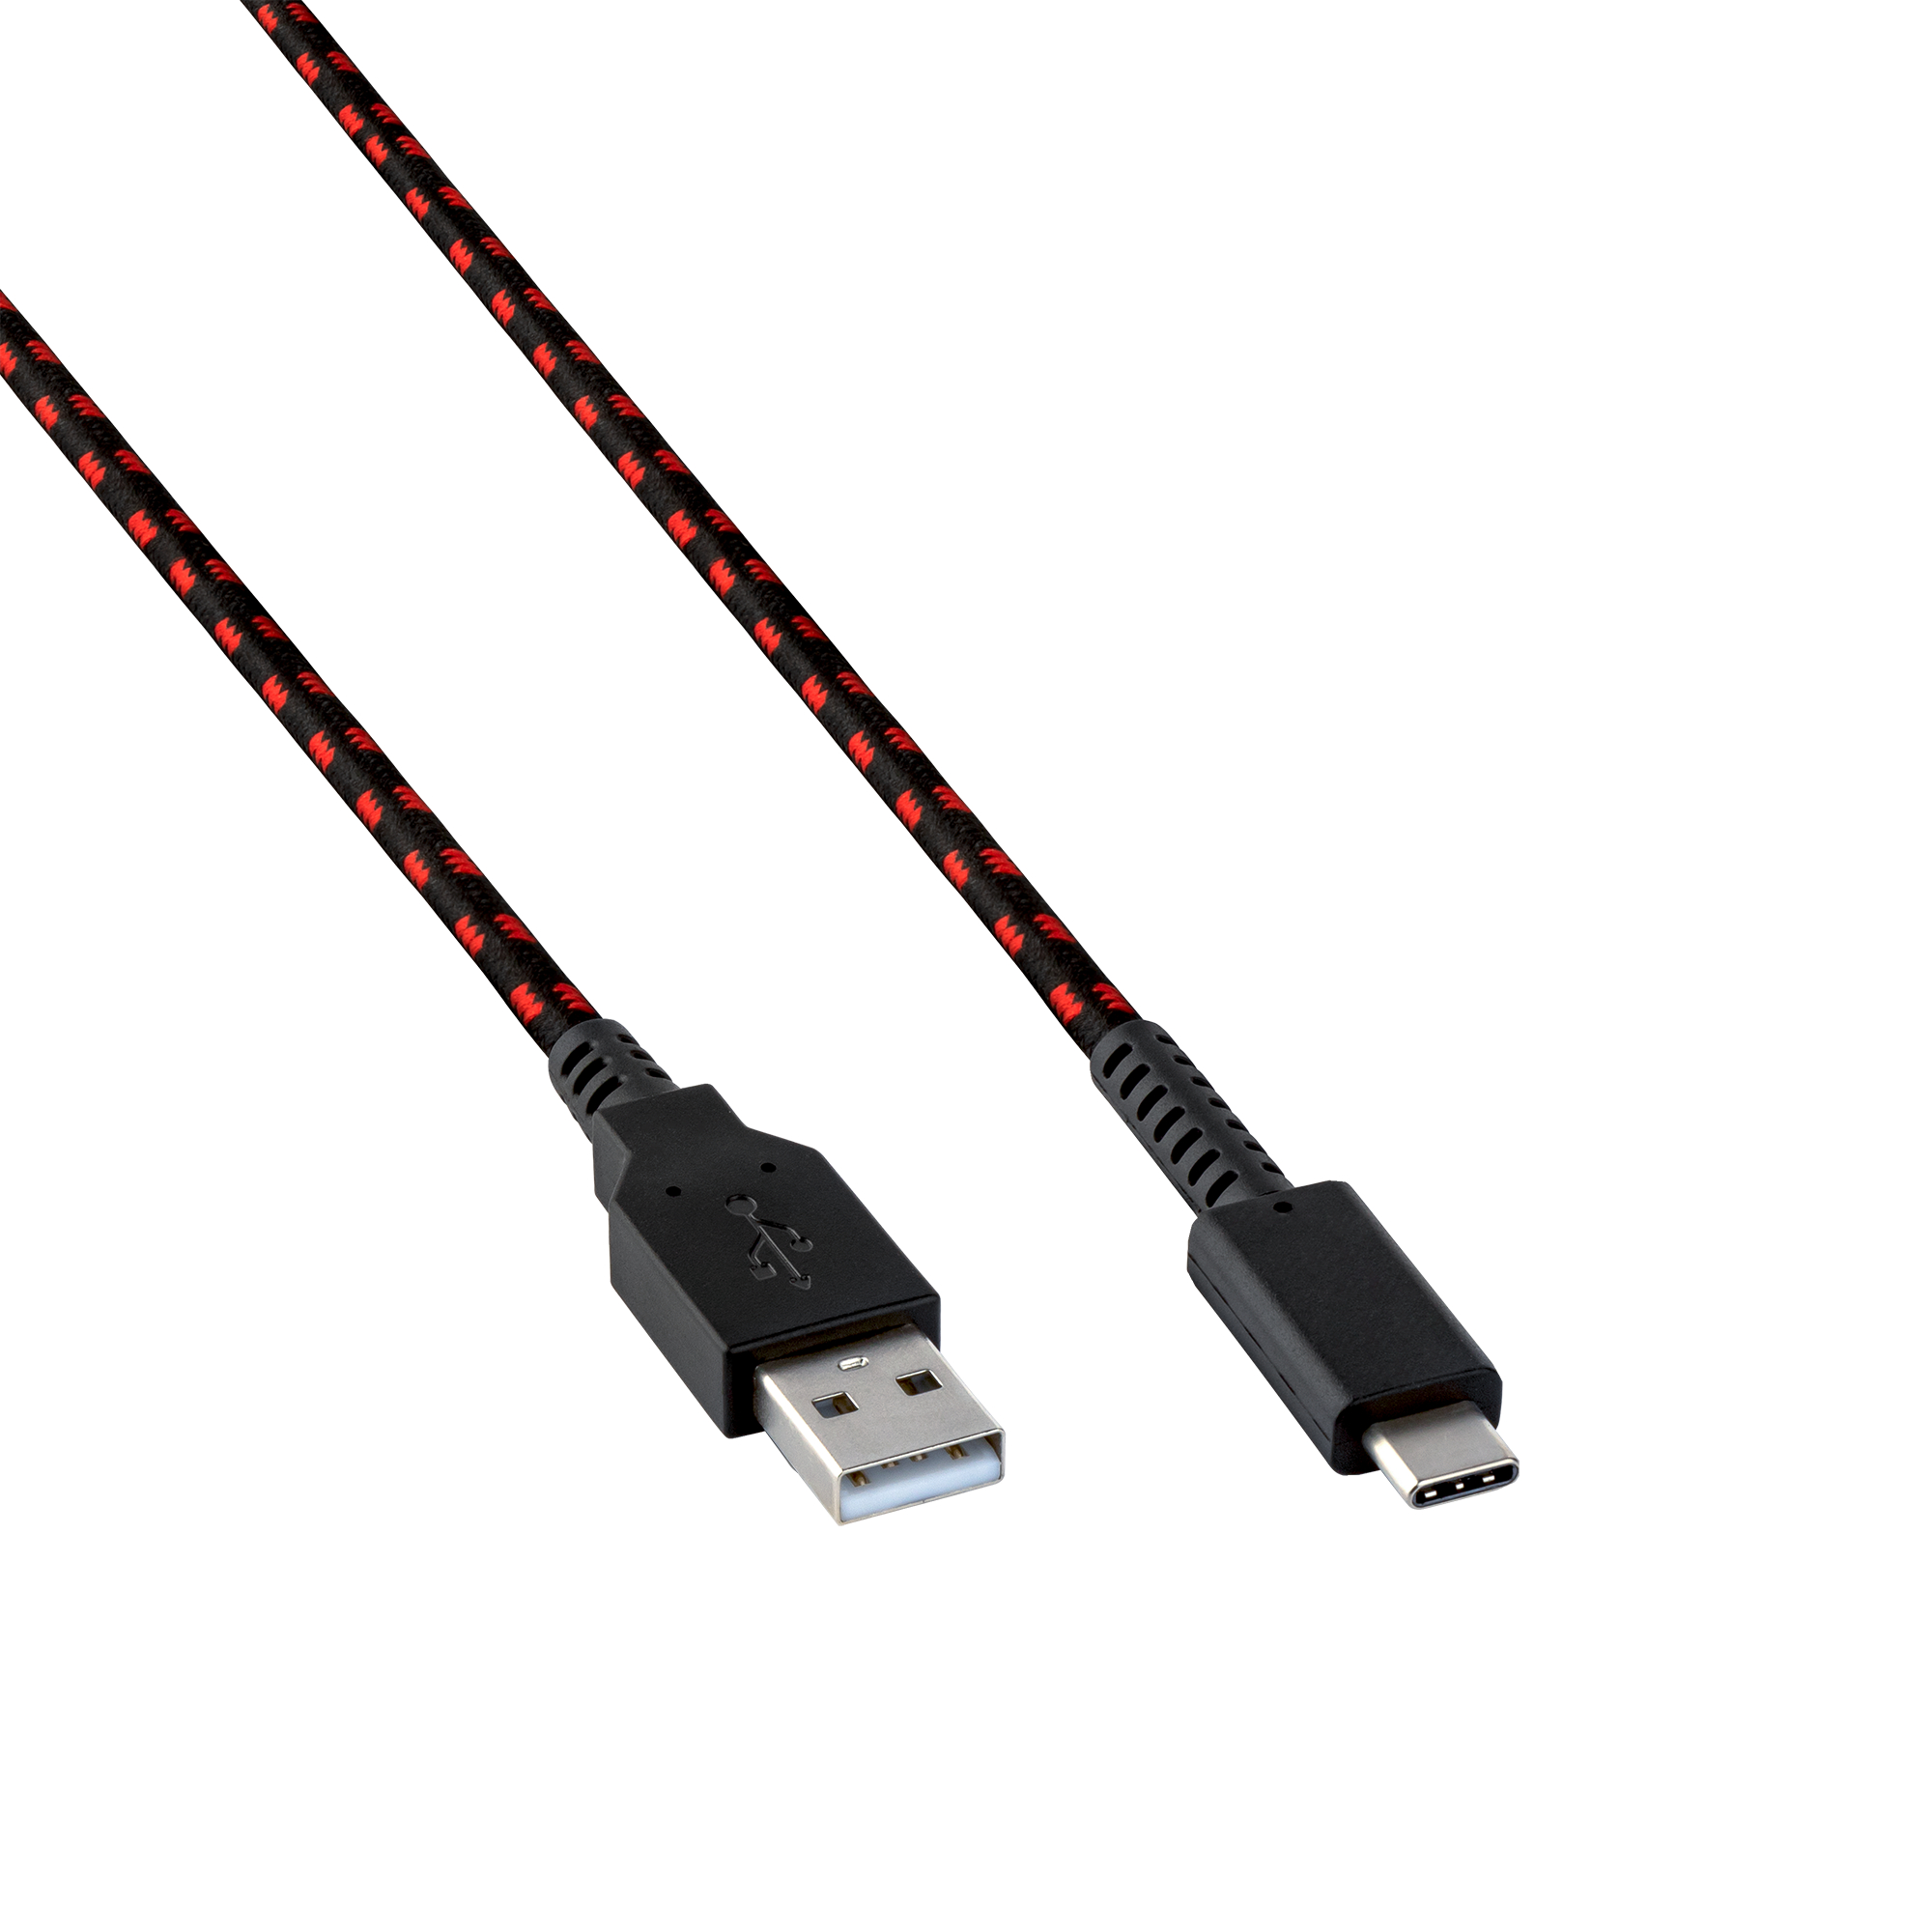 PDP Charging cable 500-211-EU for Nintendo Switch for Nintendo Switch